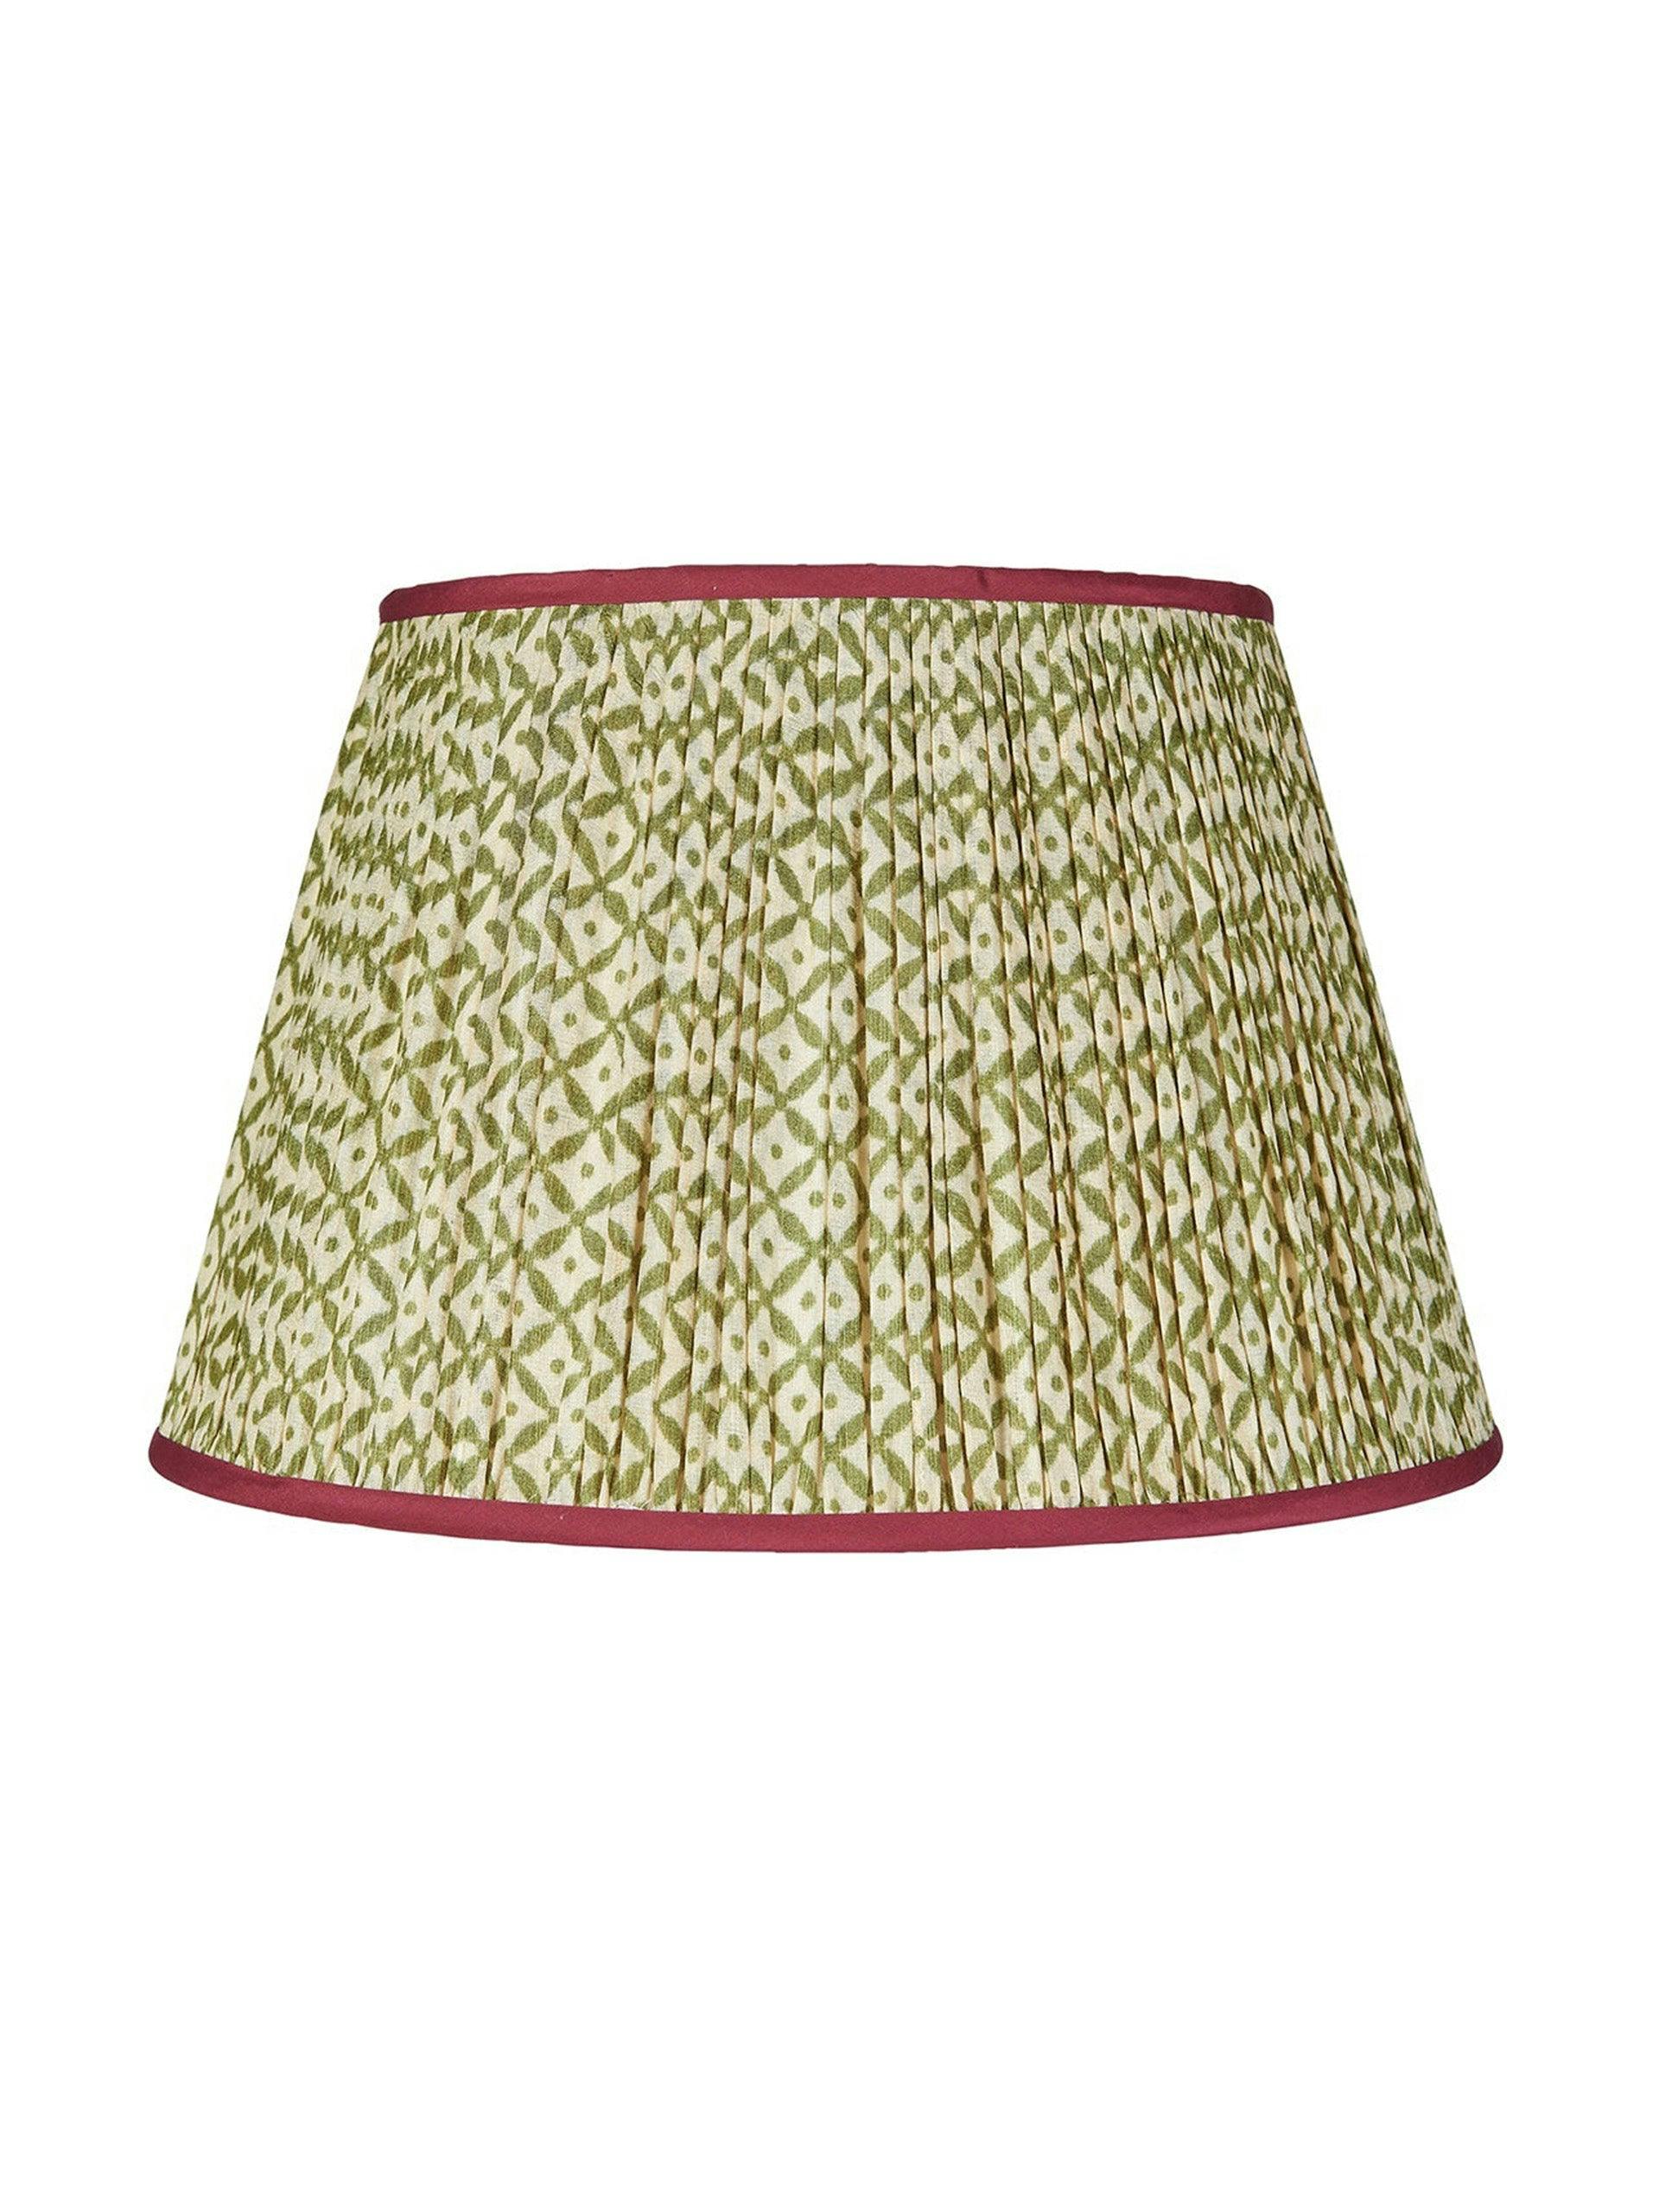 Green trellis pleated silk lampshade with red trim